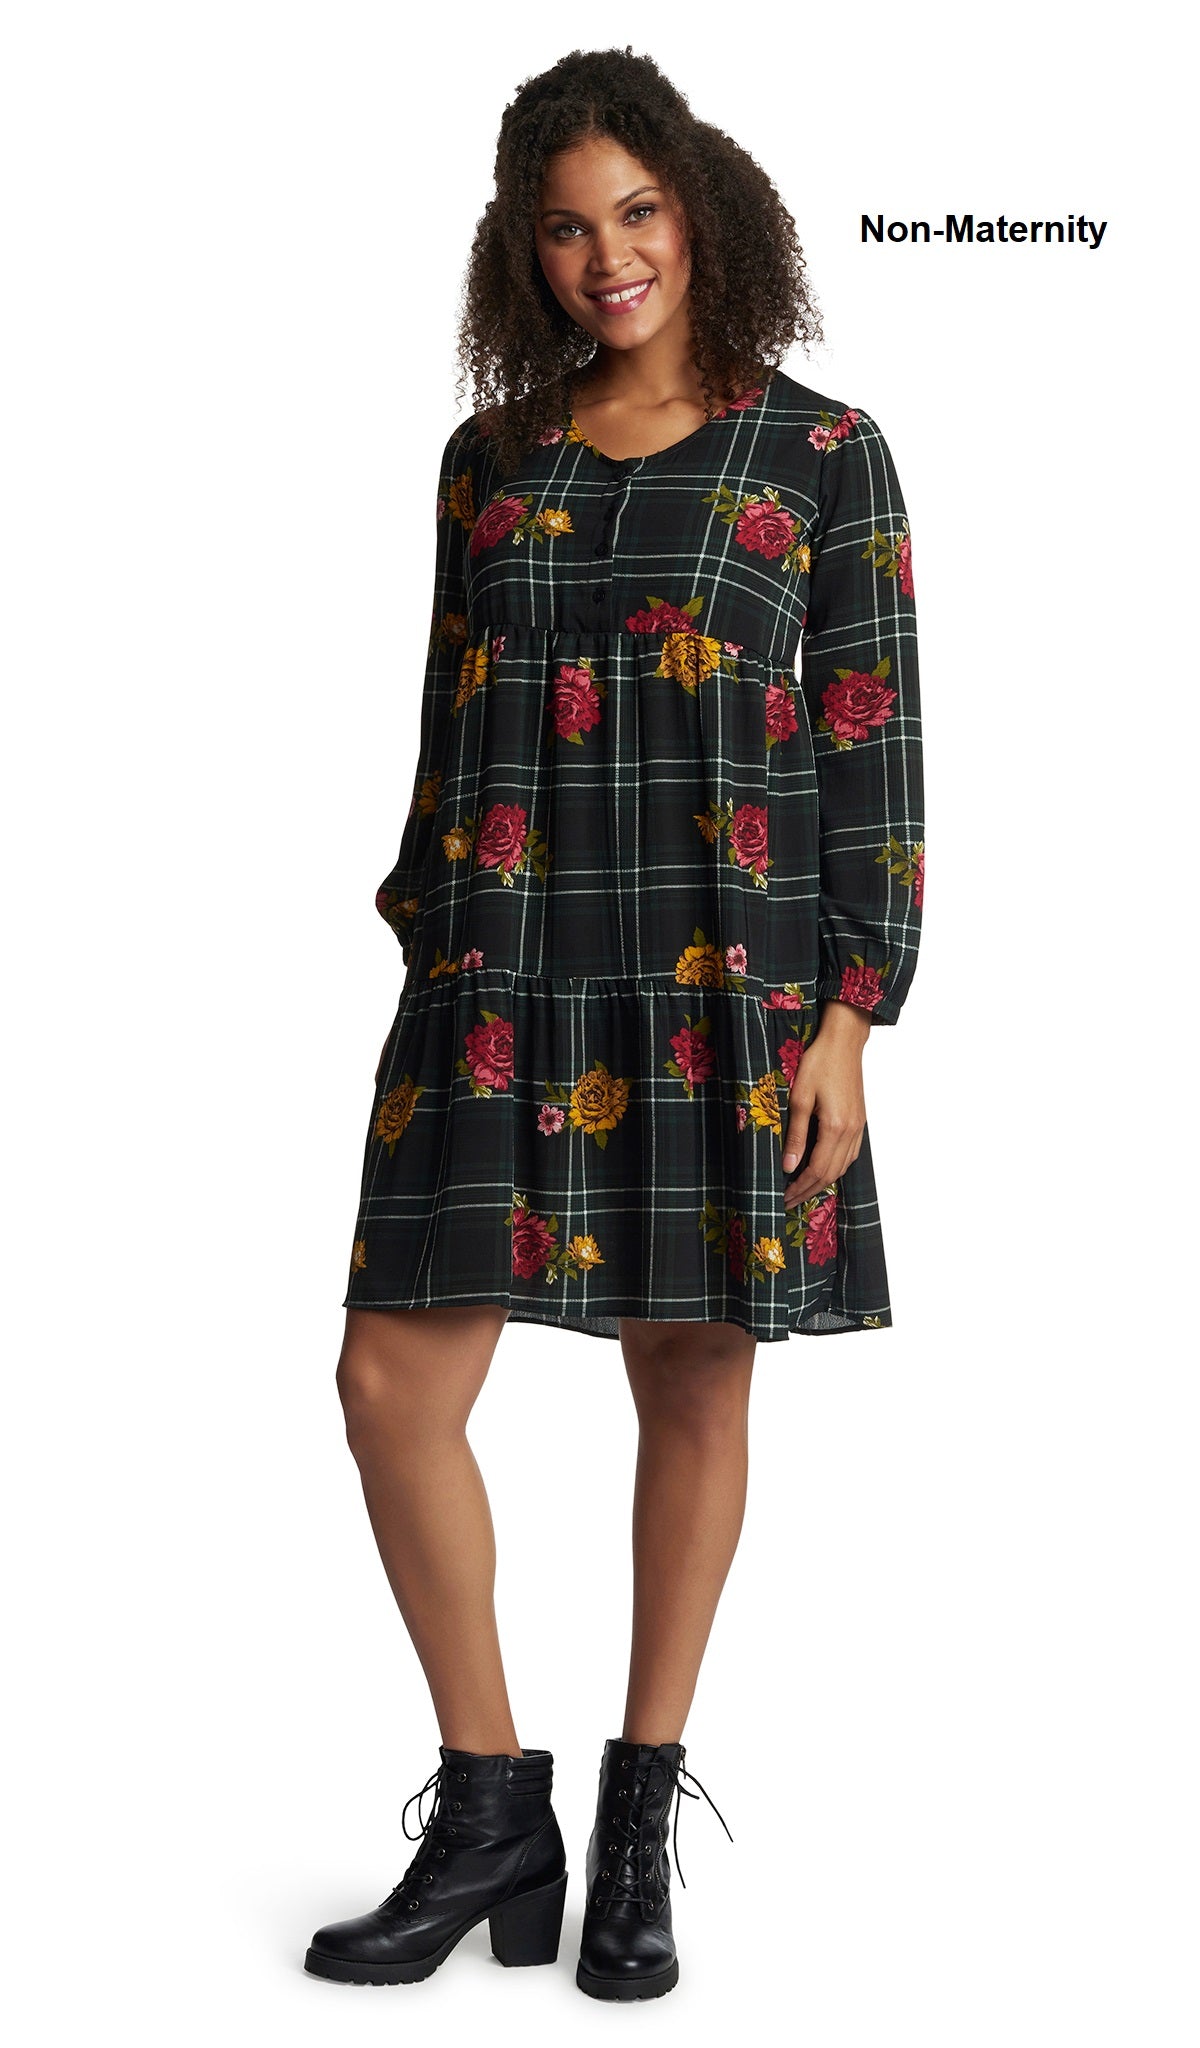 Floral Plaid Tara dress worn by woman as non-maternity style.